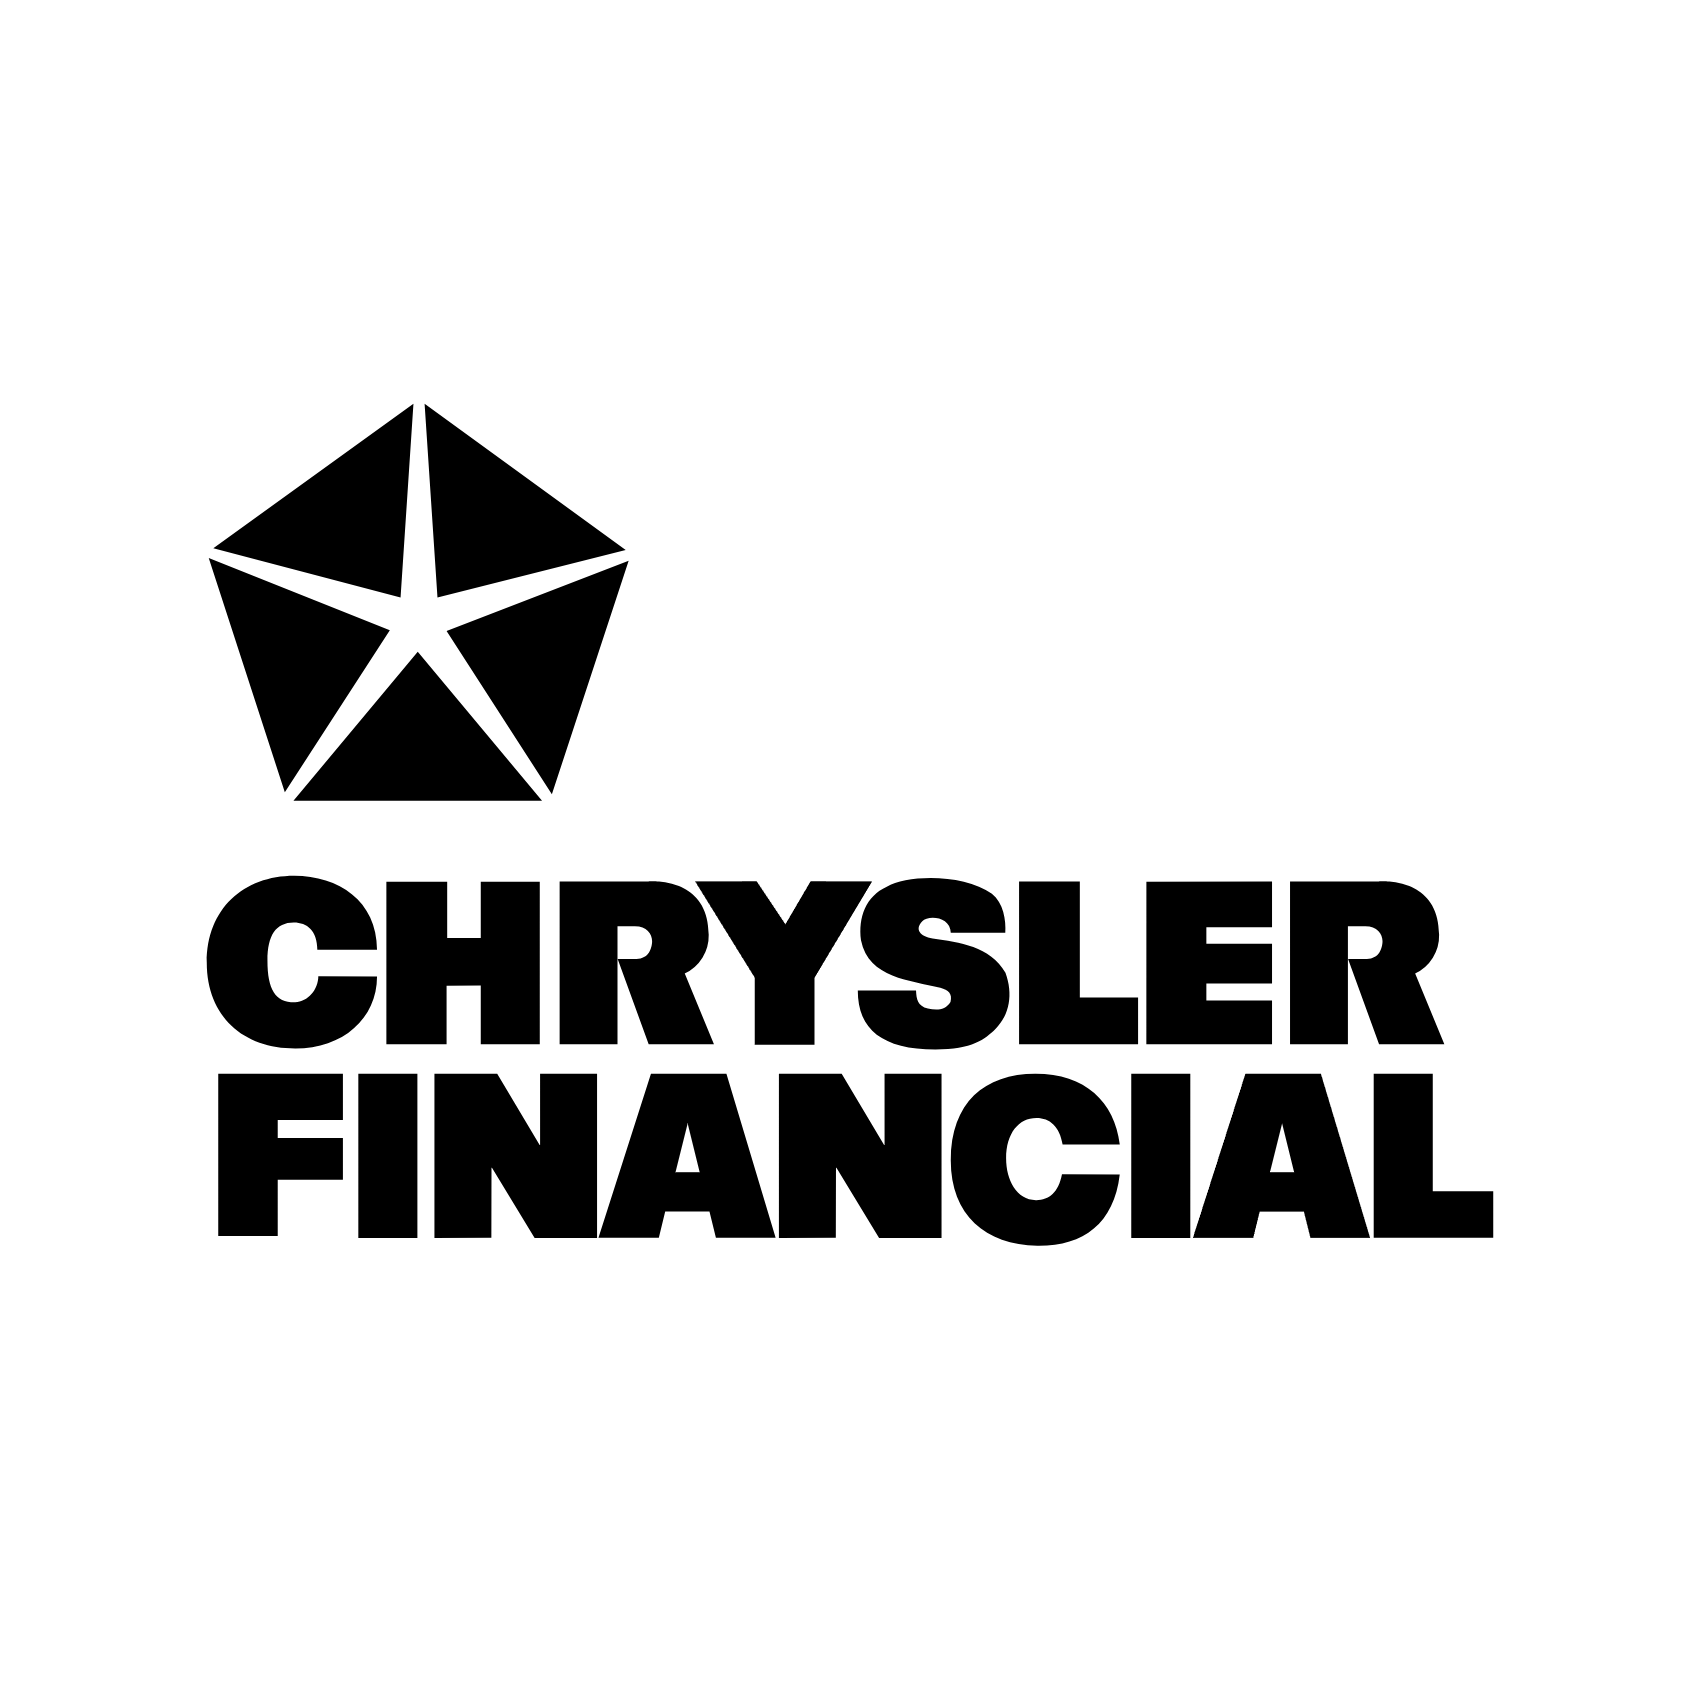 Download Chrysler financial Logo PNG and Vector (PDF, SVG, Ai, EPS) Free